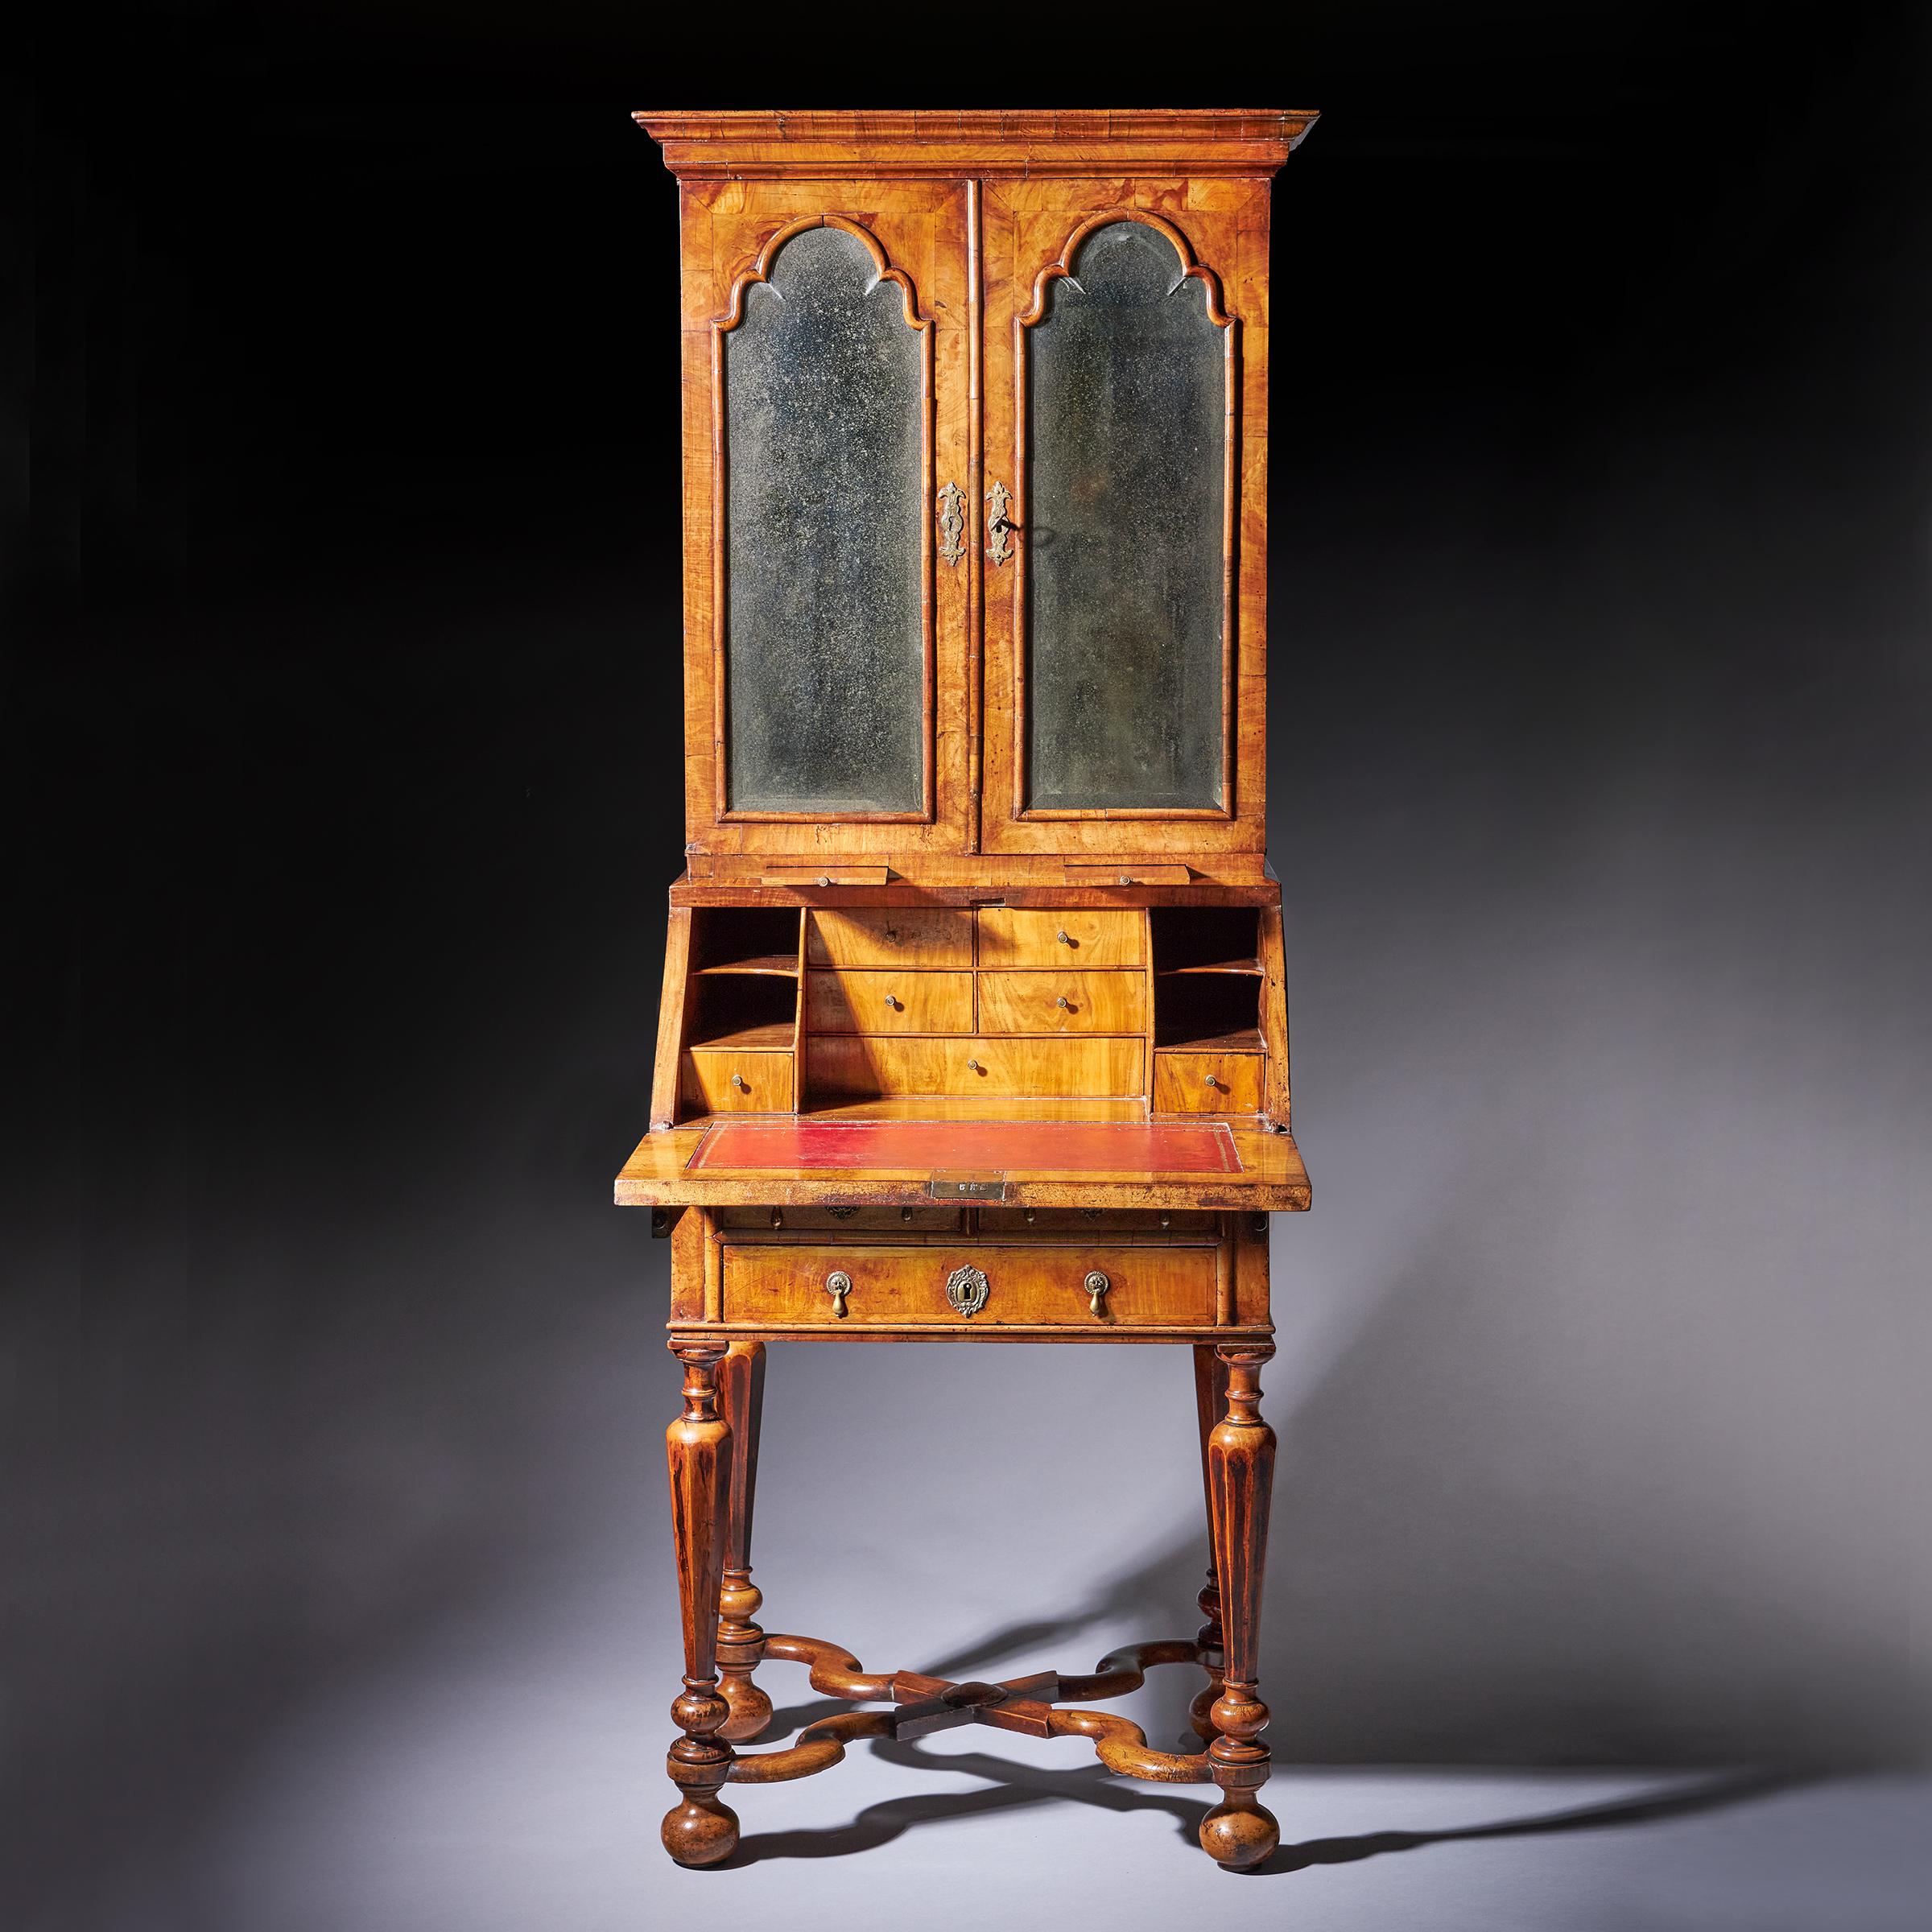 18th Century and Earlier Diminutive 17th Century William and Mary Figured Walnut Bureau Bookcase on Stand